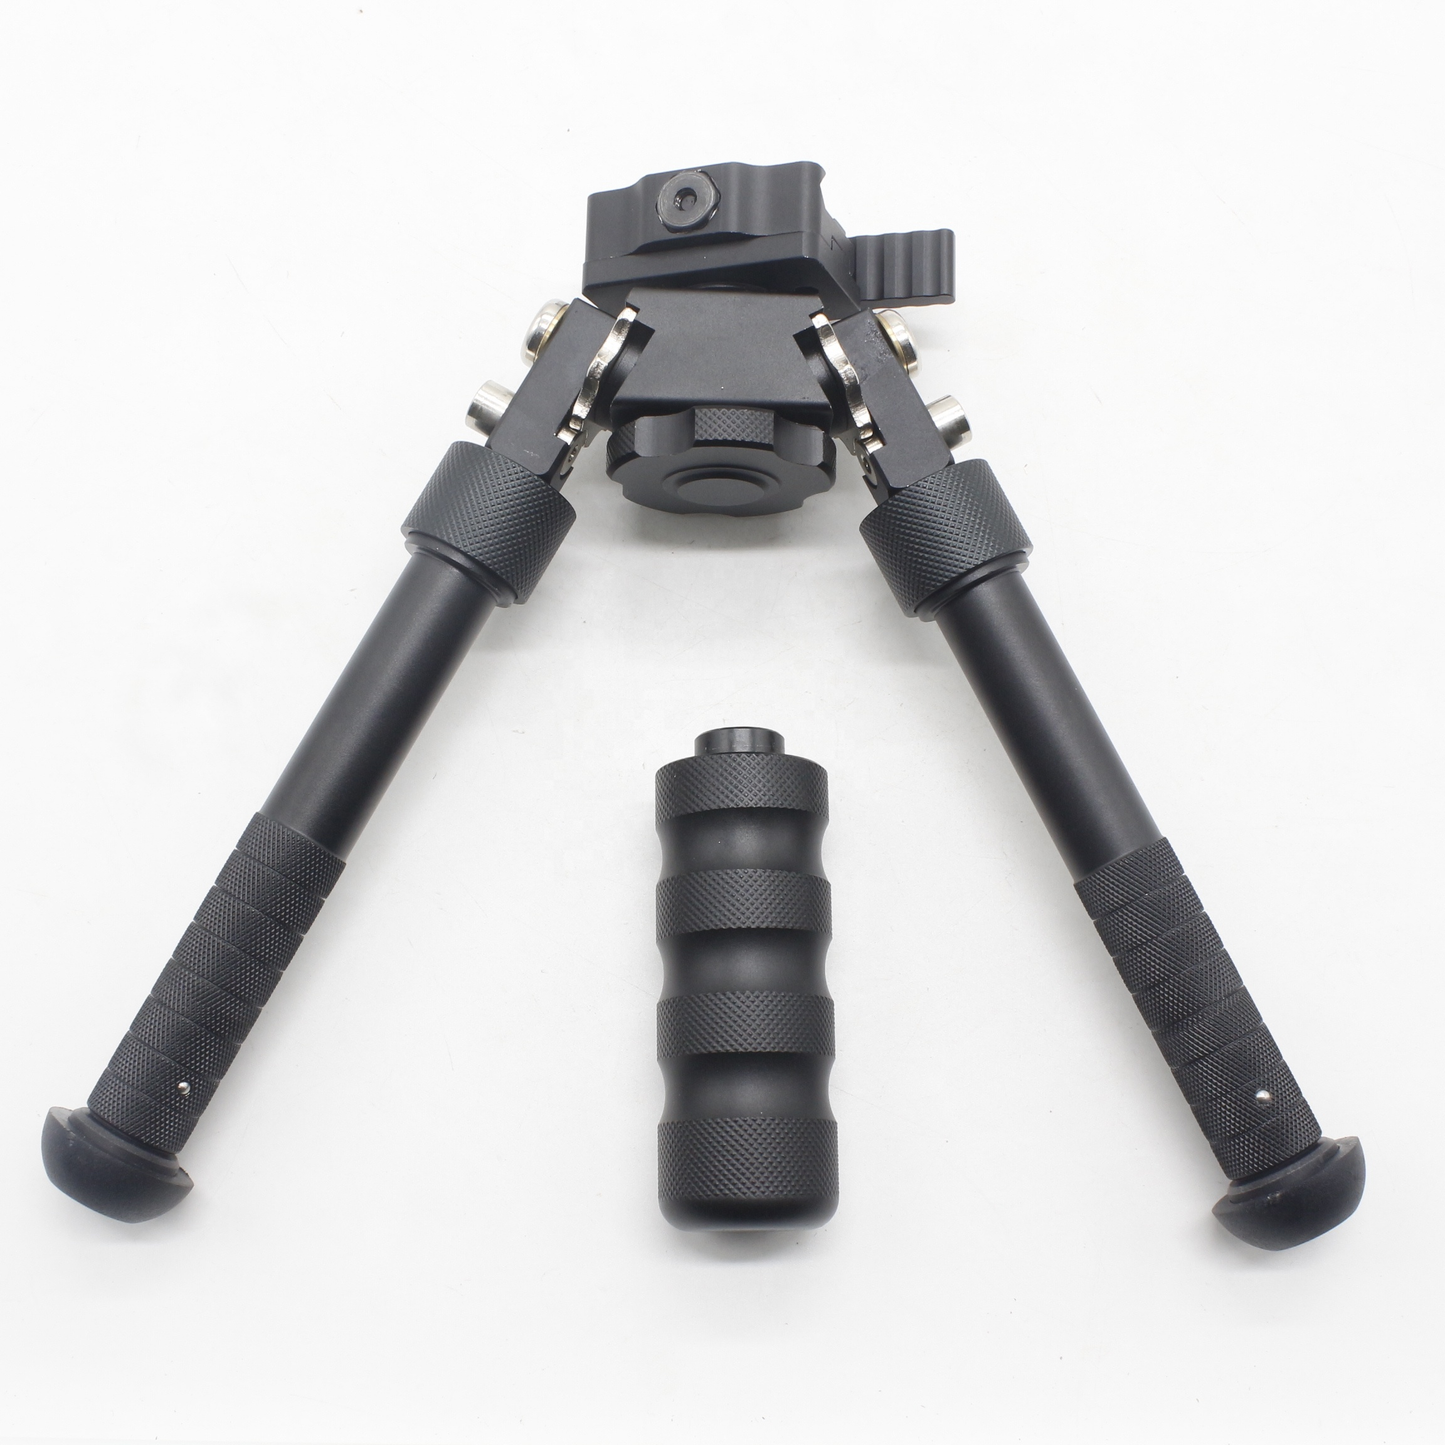 Adjustable Rotate head Quick Detach Extension Flat Tactical Shooting Stable Secure Tripod Stand